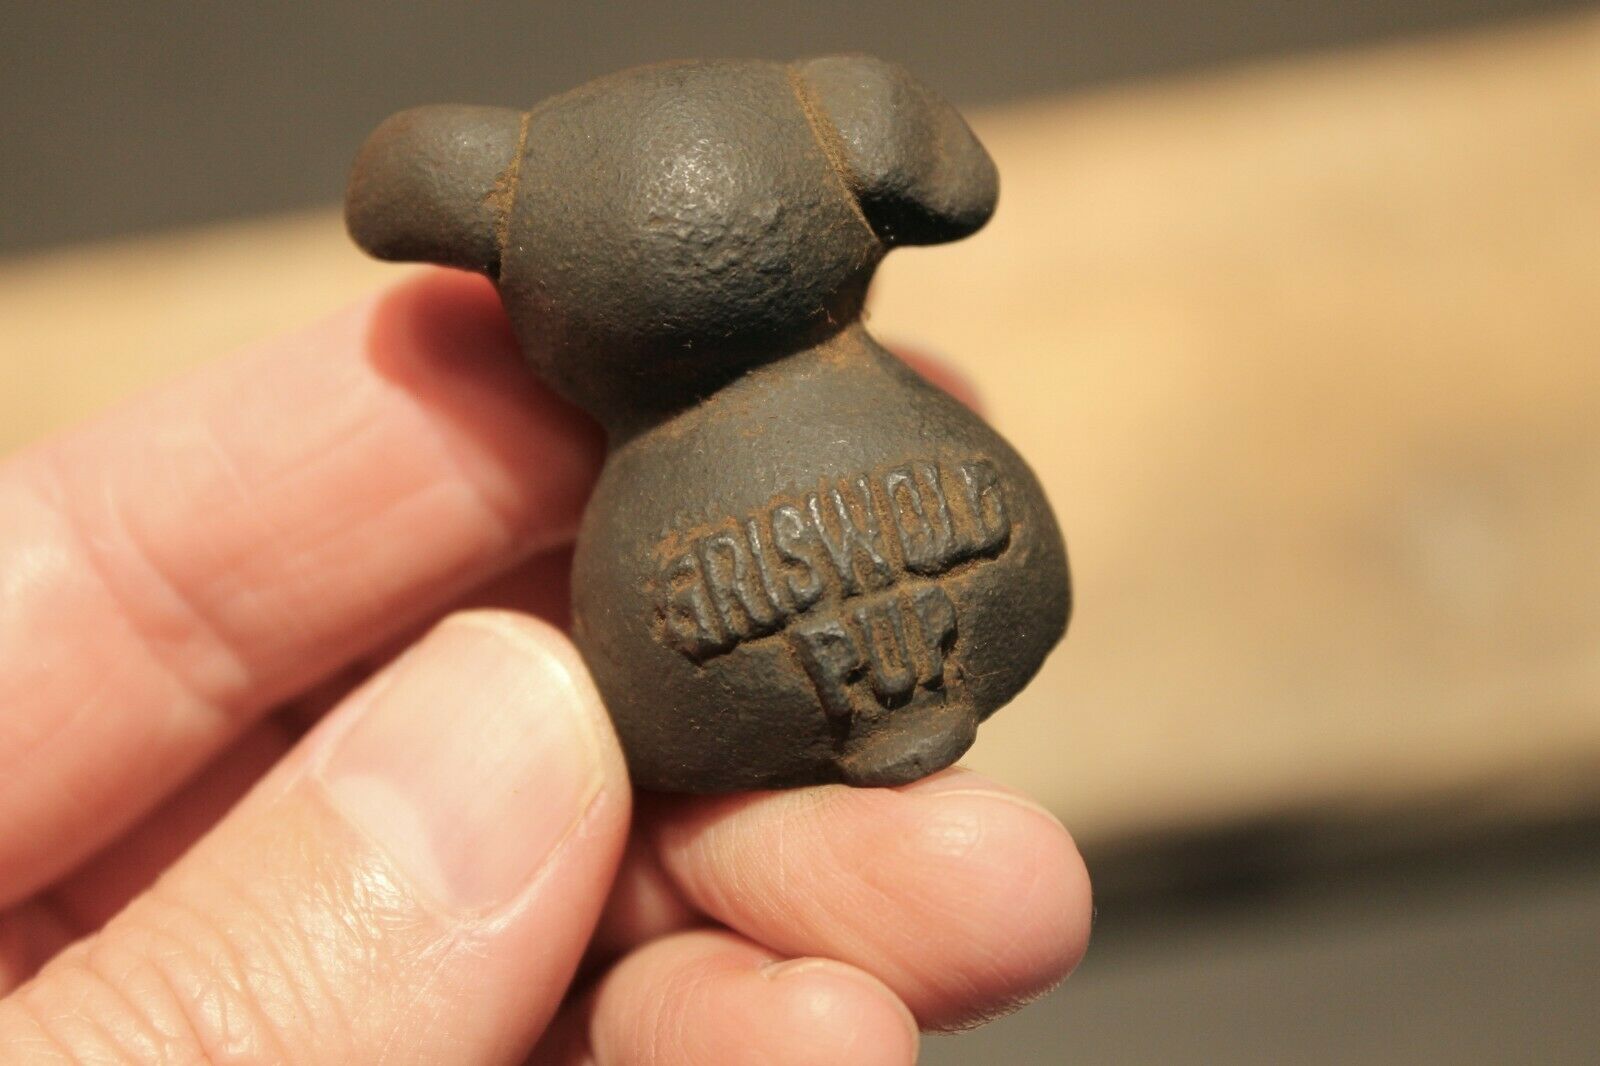 Vintage Antique Style Miniature Cast Iron "Griswold Pup" Dog - Early Home Decor